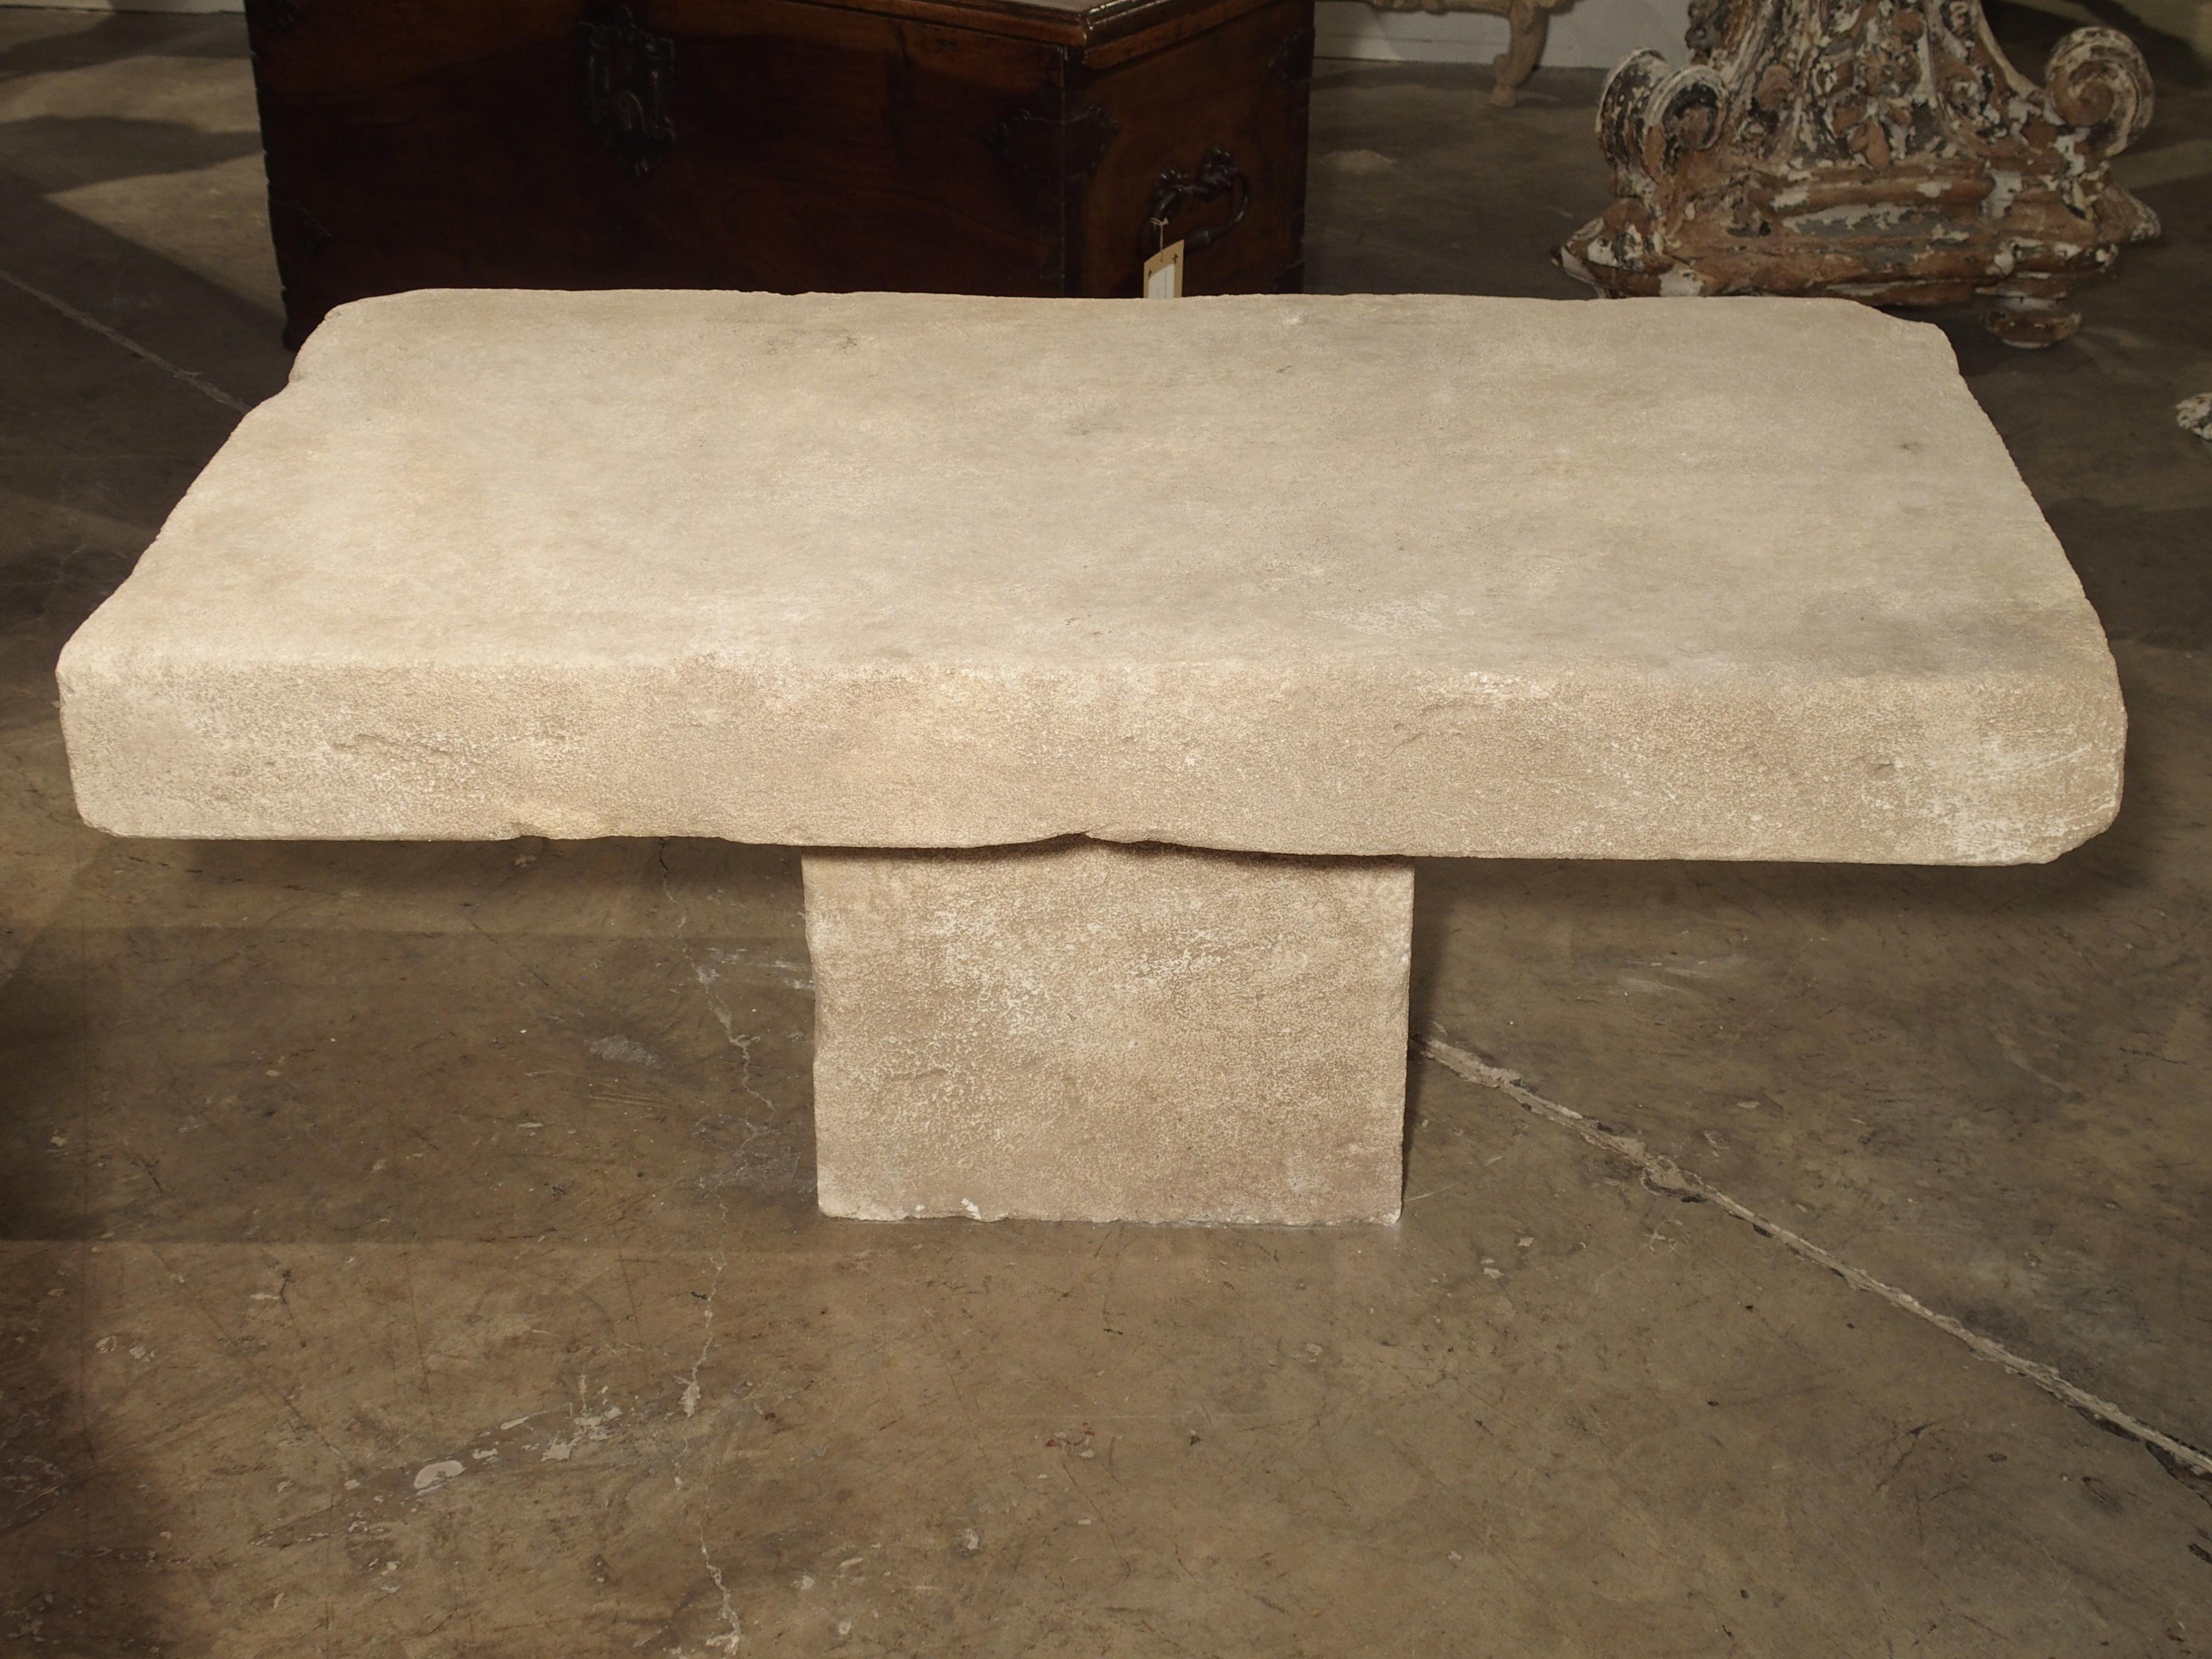 Hand-Carved Limestone Coffee Table from Provence, France